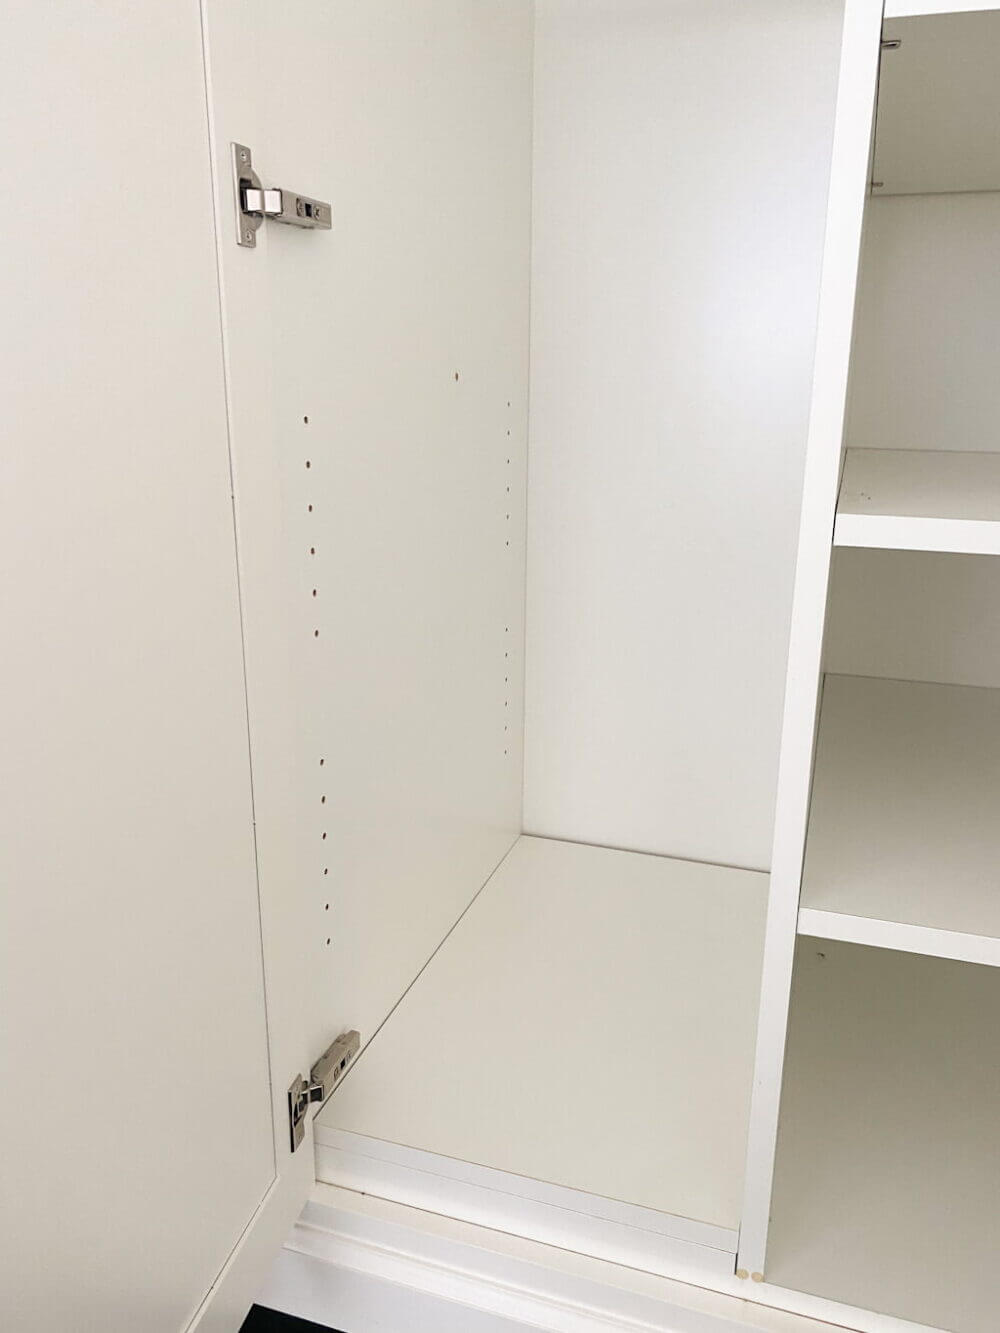 Closet Built Ins: The Genius Way to Convert Your Basic Space for Max ...